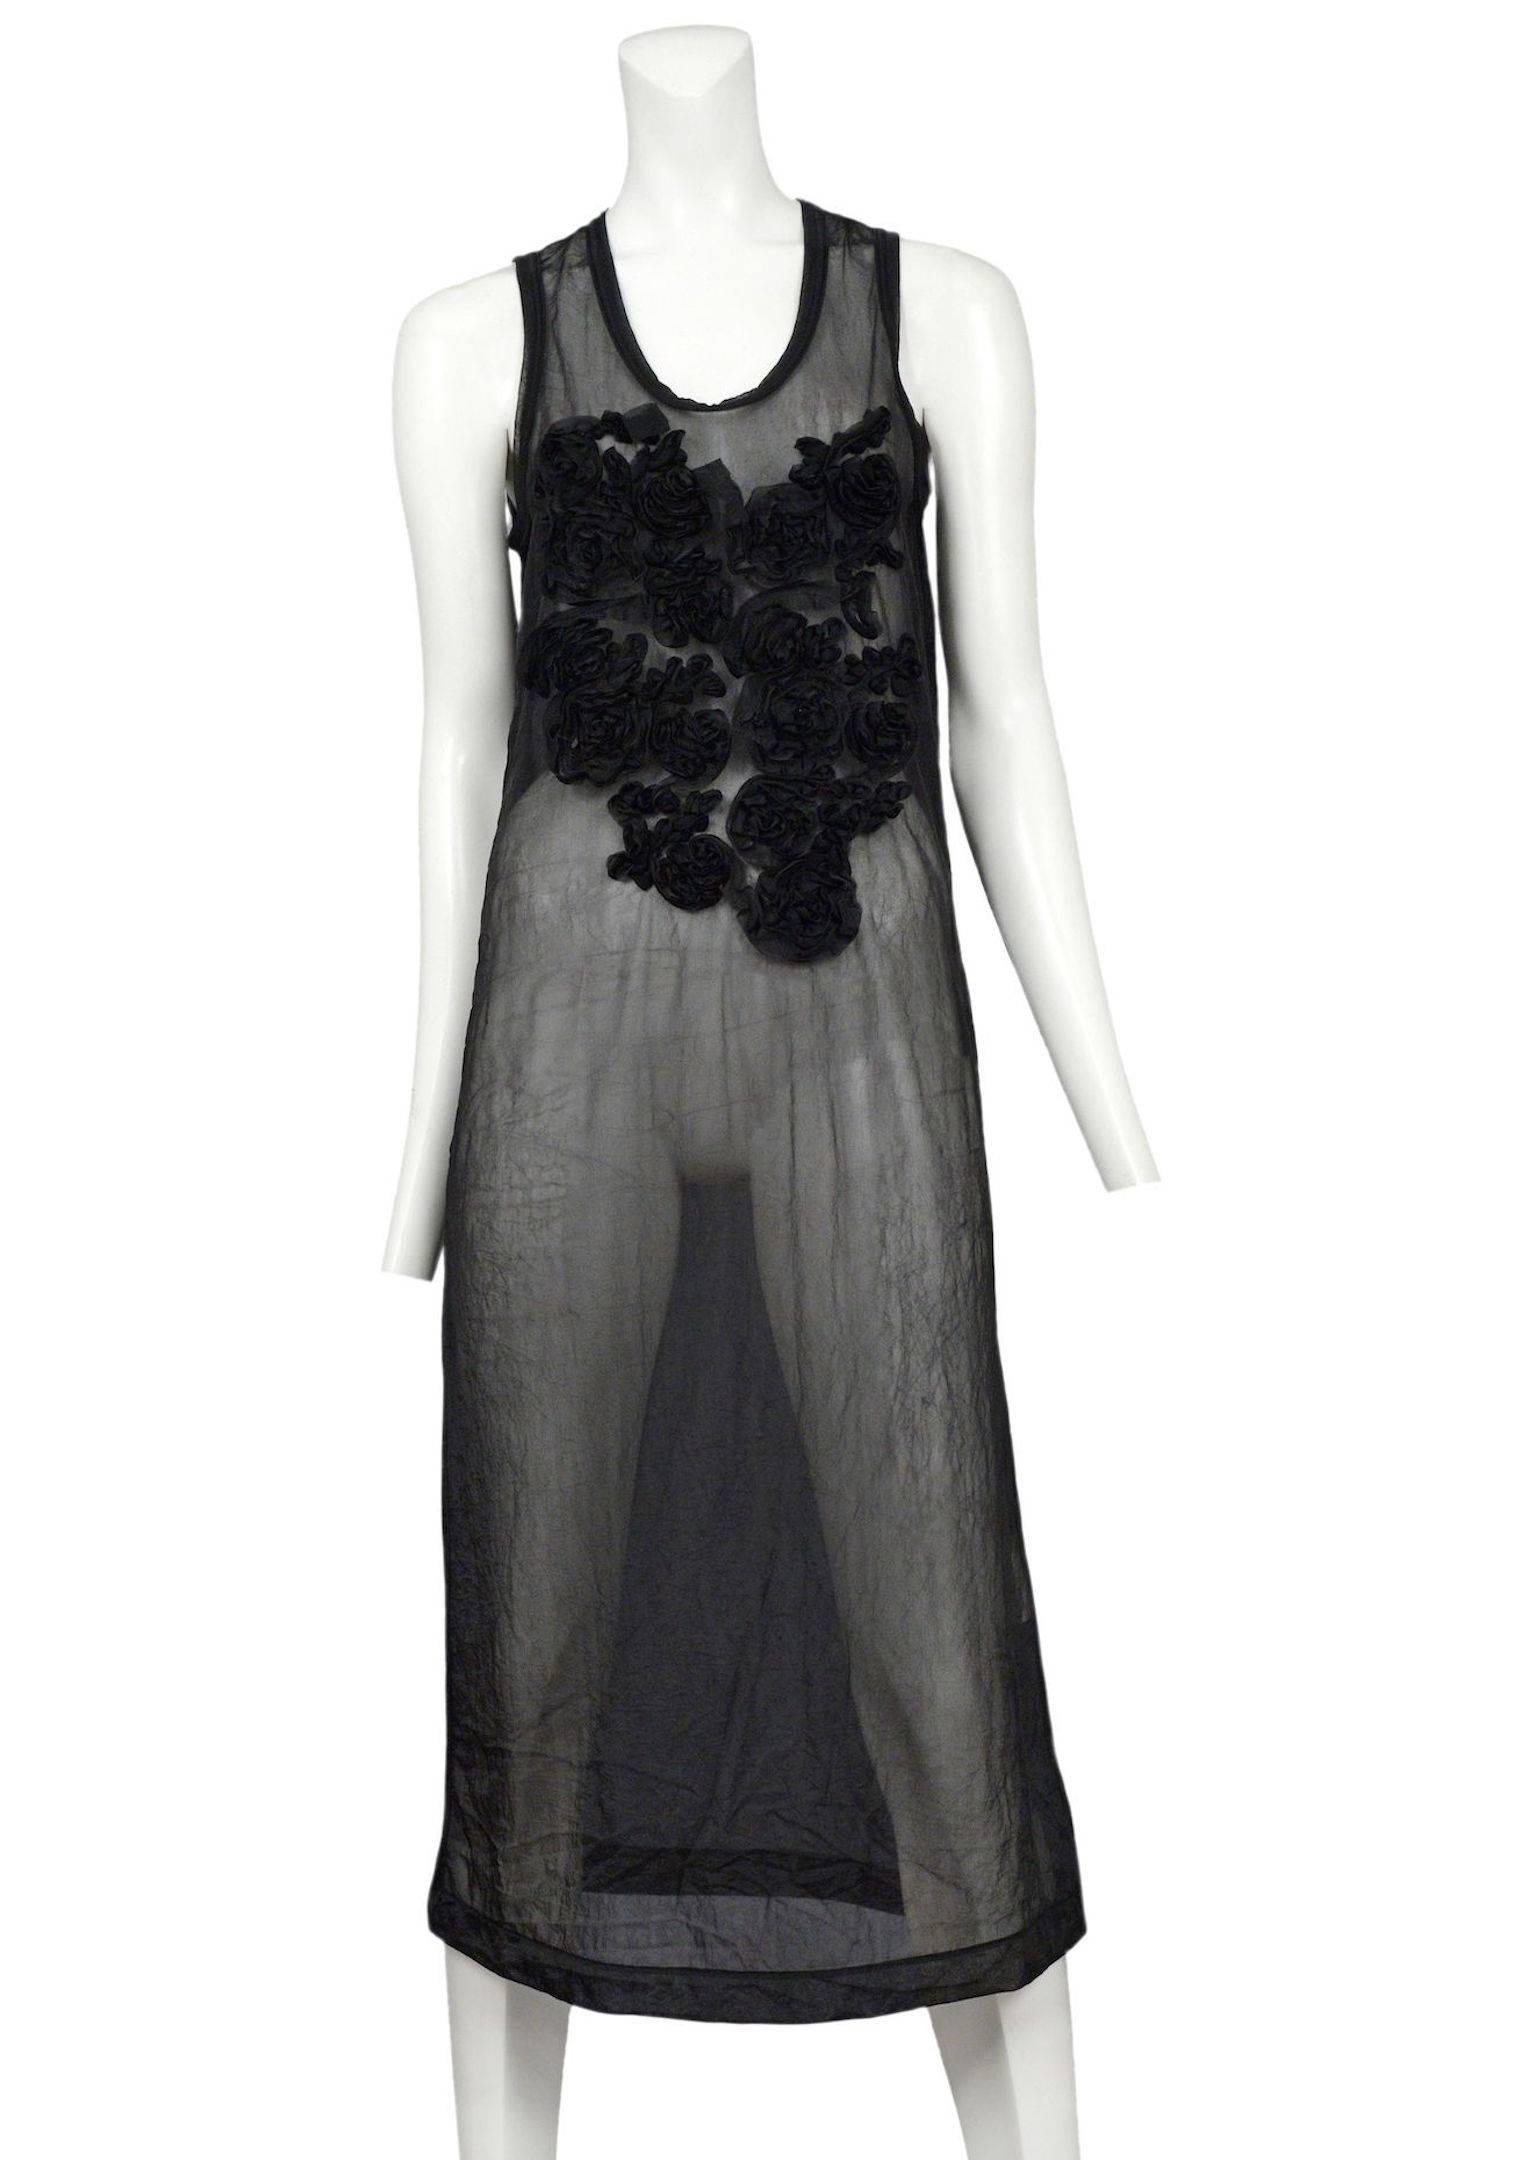 Vintage Comme des Garcons black sheer sleeveless below the knee dress featuring black ruffle appliqués adorning the chest. Circa 1994.

Please inquire for additional photos. 
